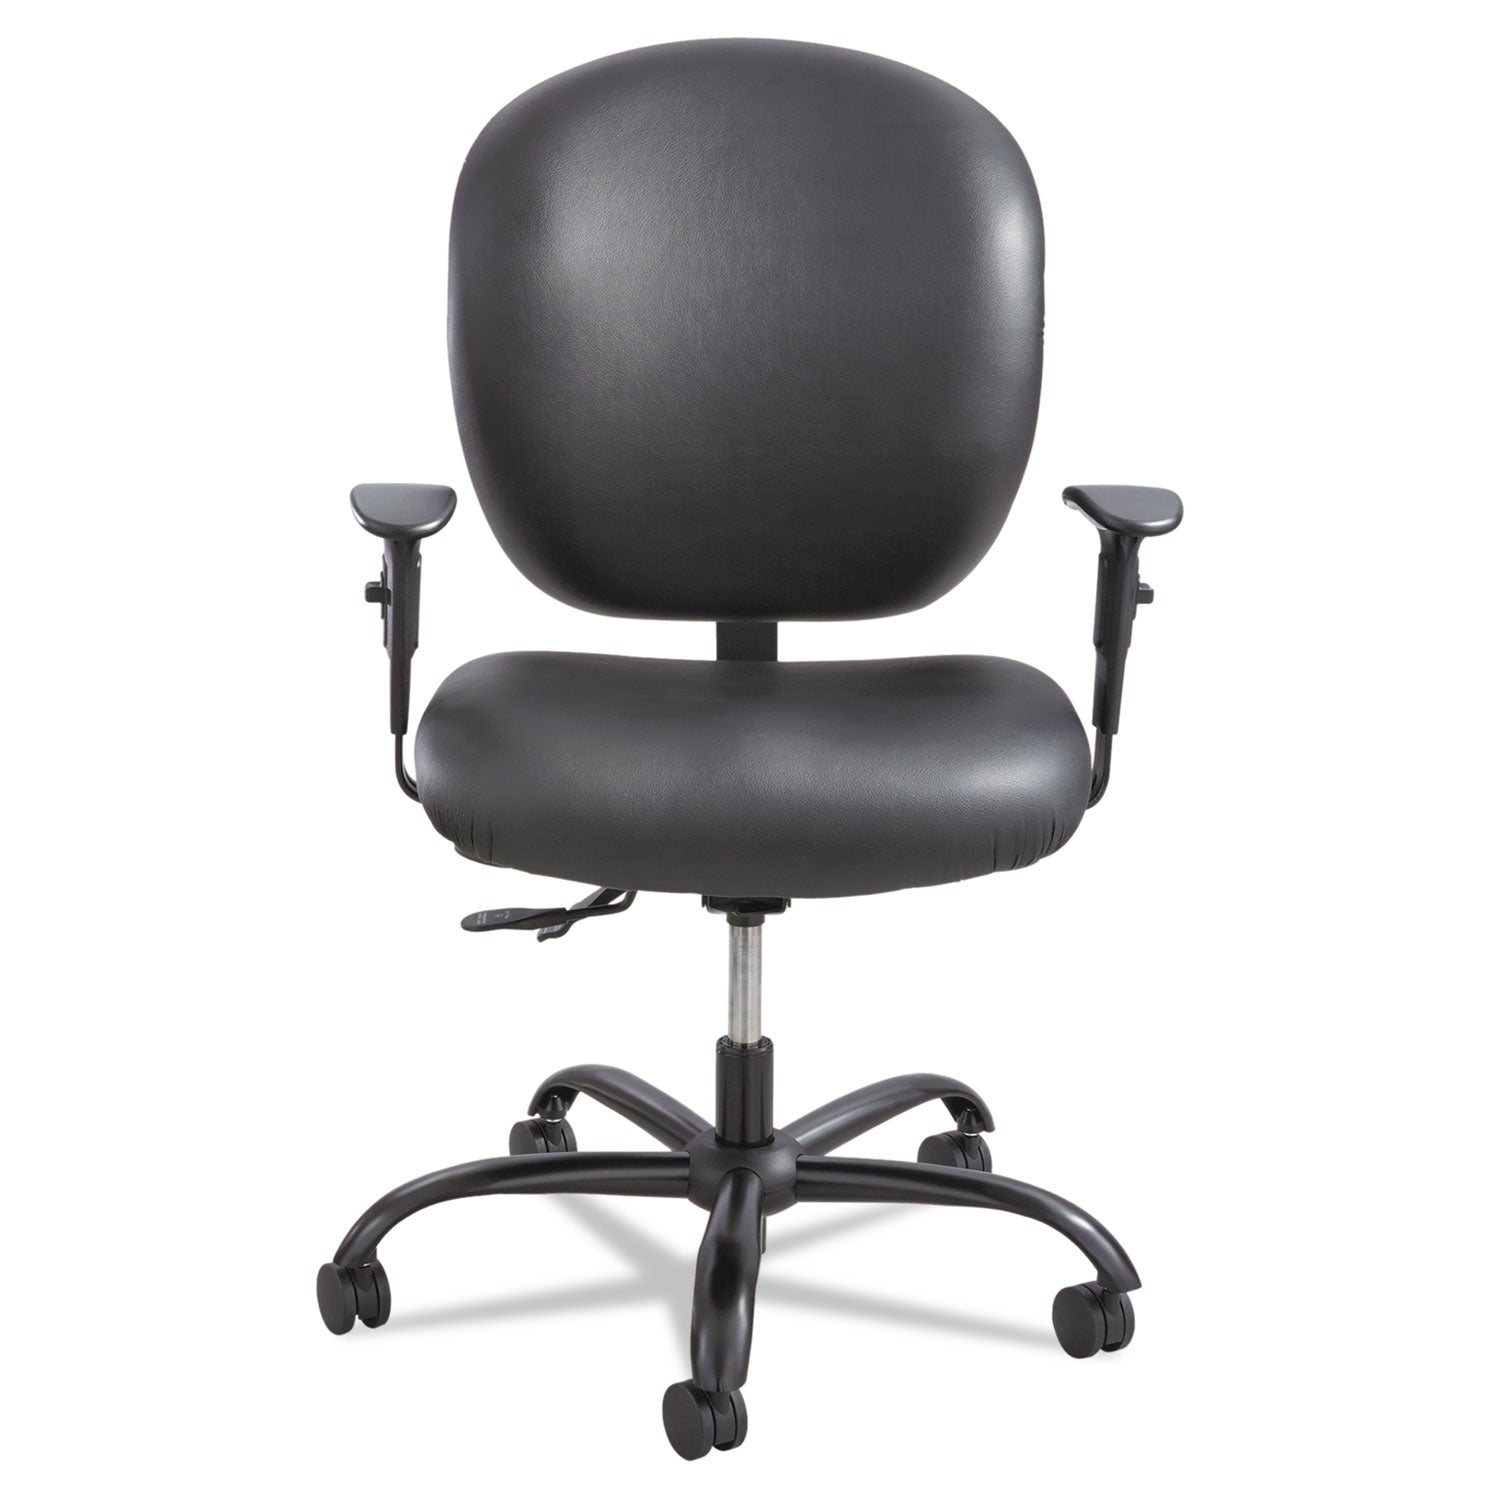 Alday Intensive-Use Chair, Supports Up to 500 lb, 17.5" to 20" Seat Height, Black Vinyl Seat/Back, Black Base - 